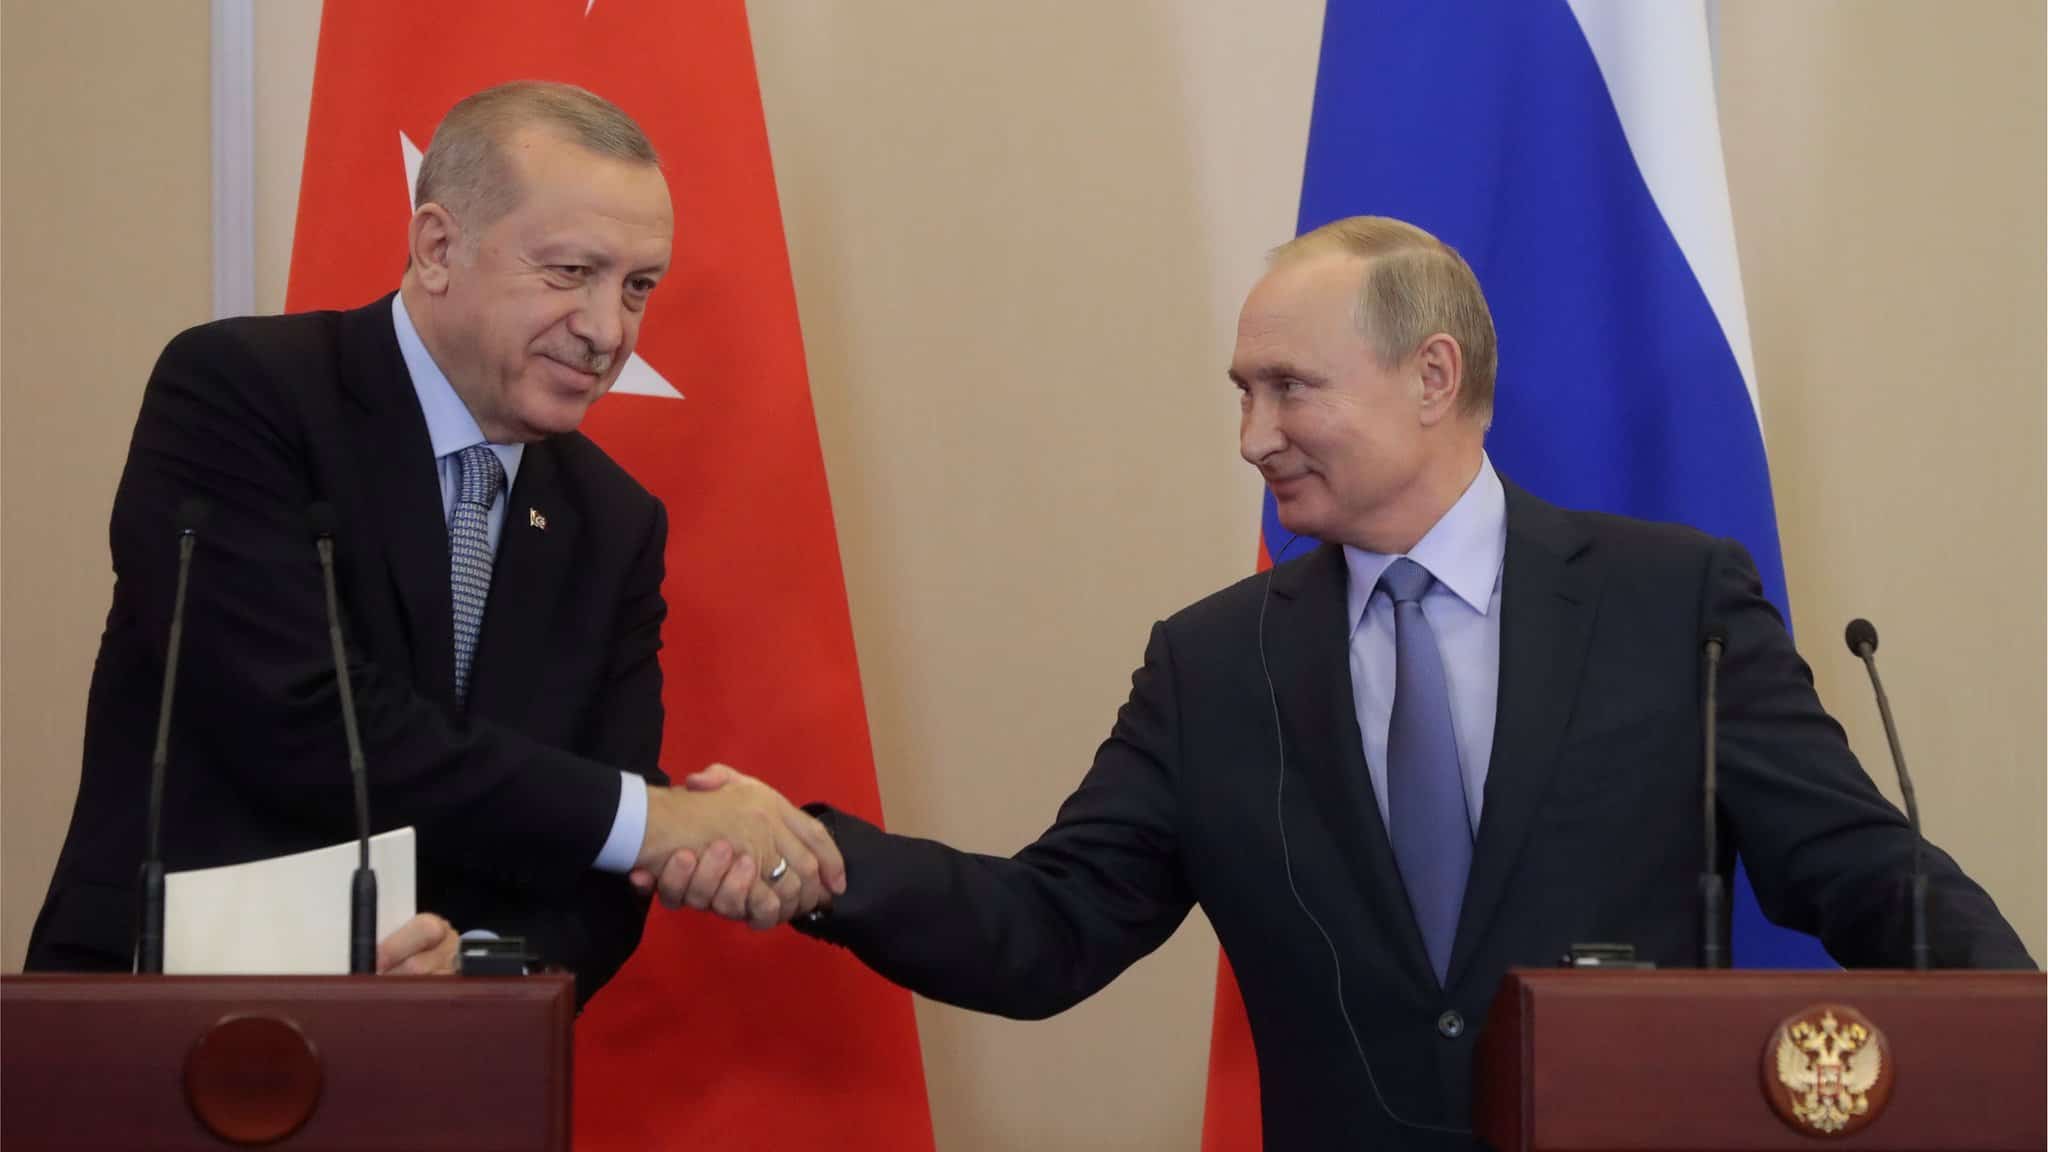 Turkey’s Tactical View on Relations with Russia